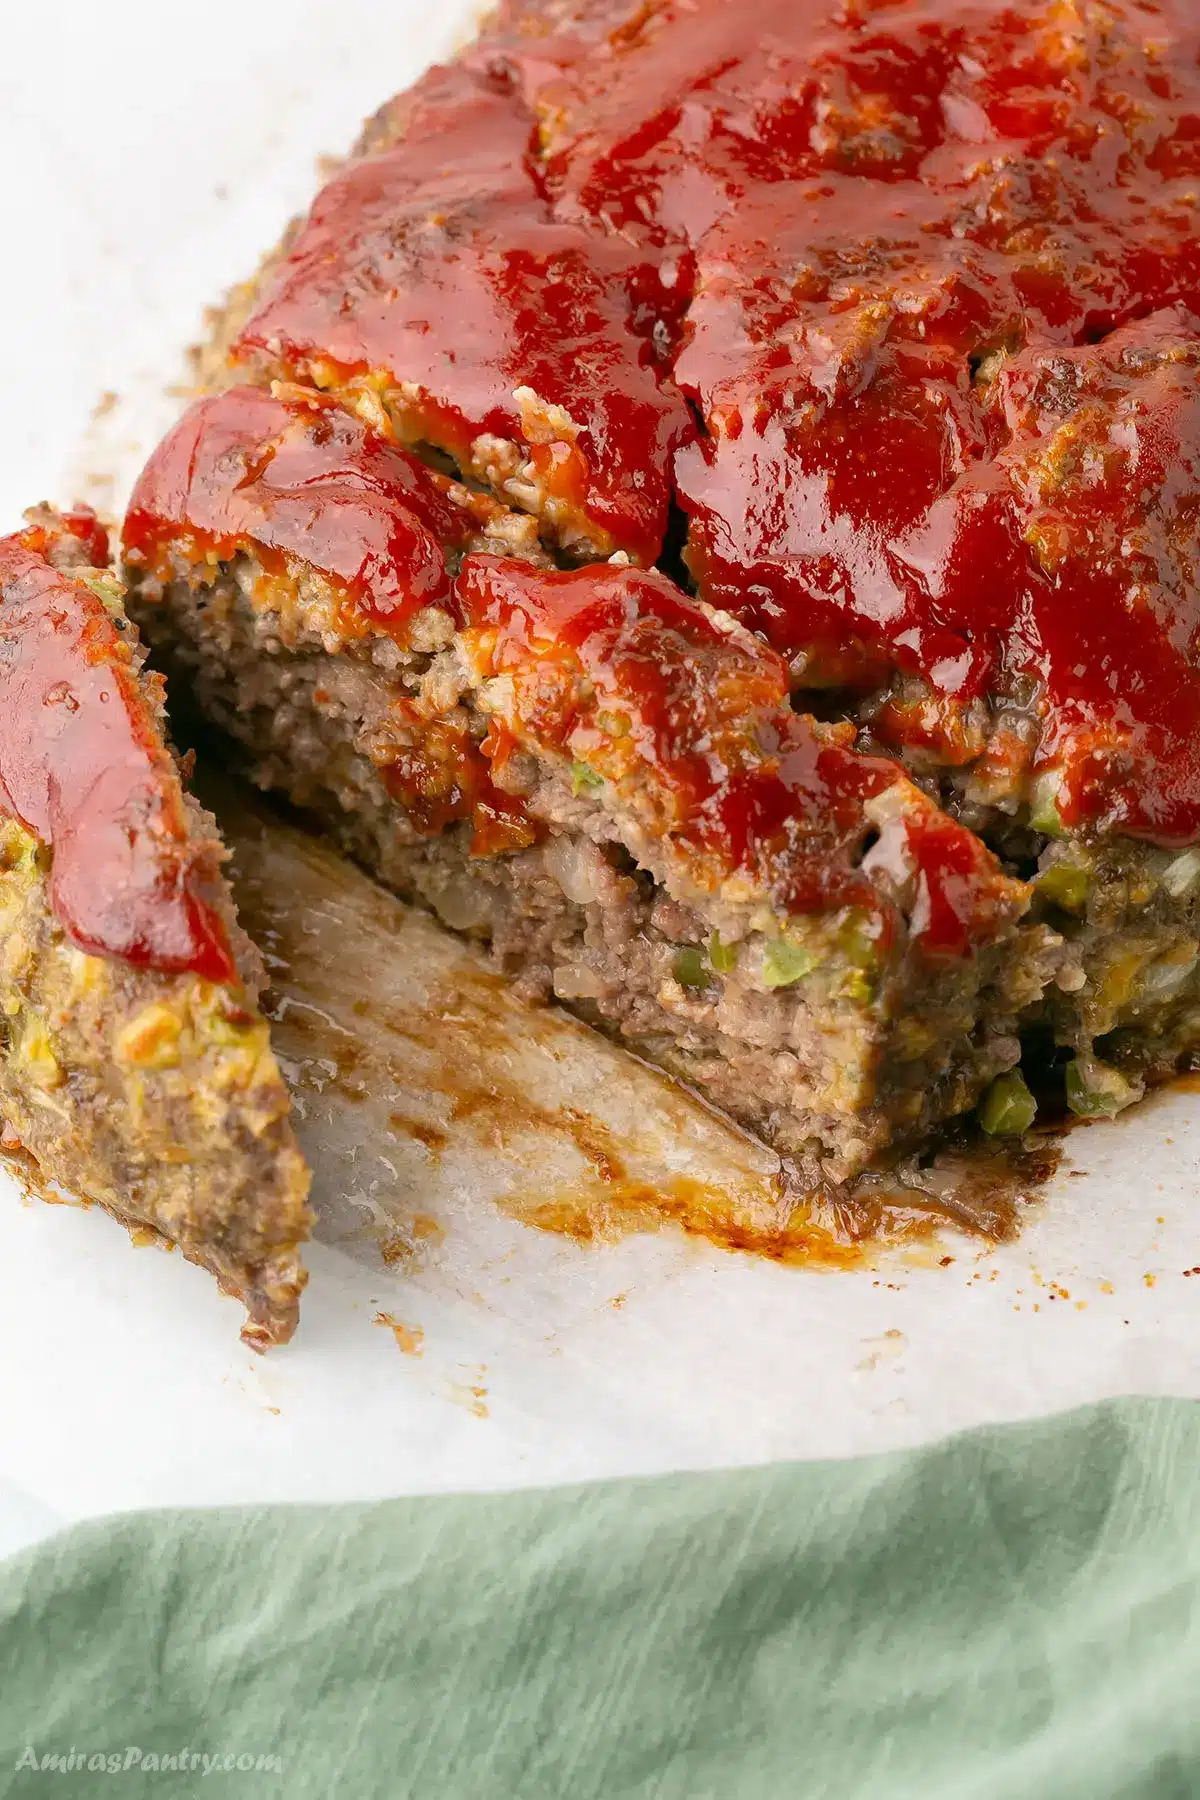 Meatloaf sliced to show texture.